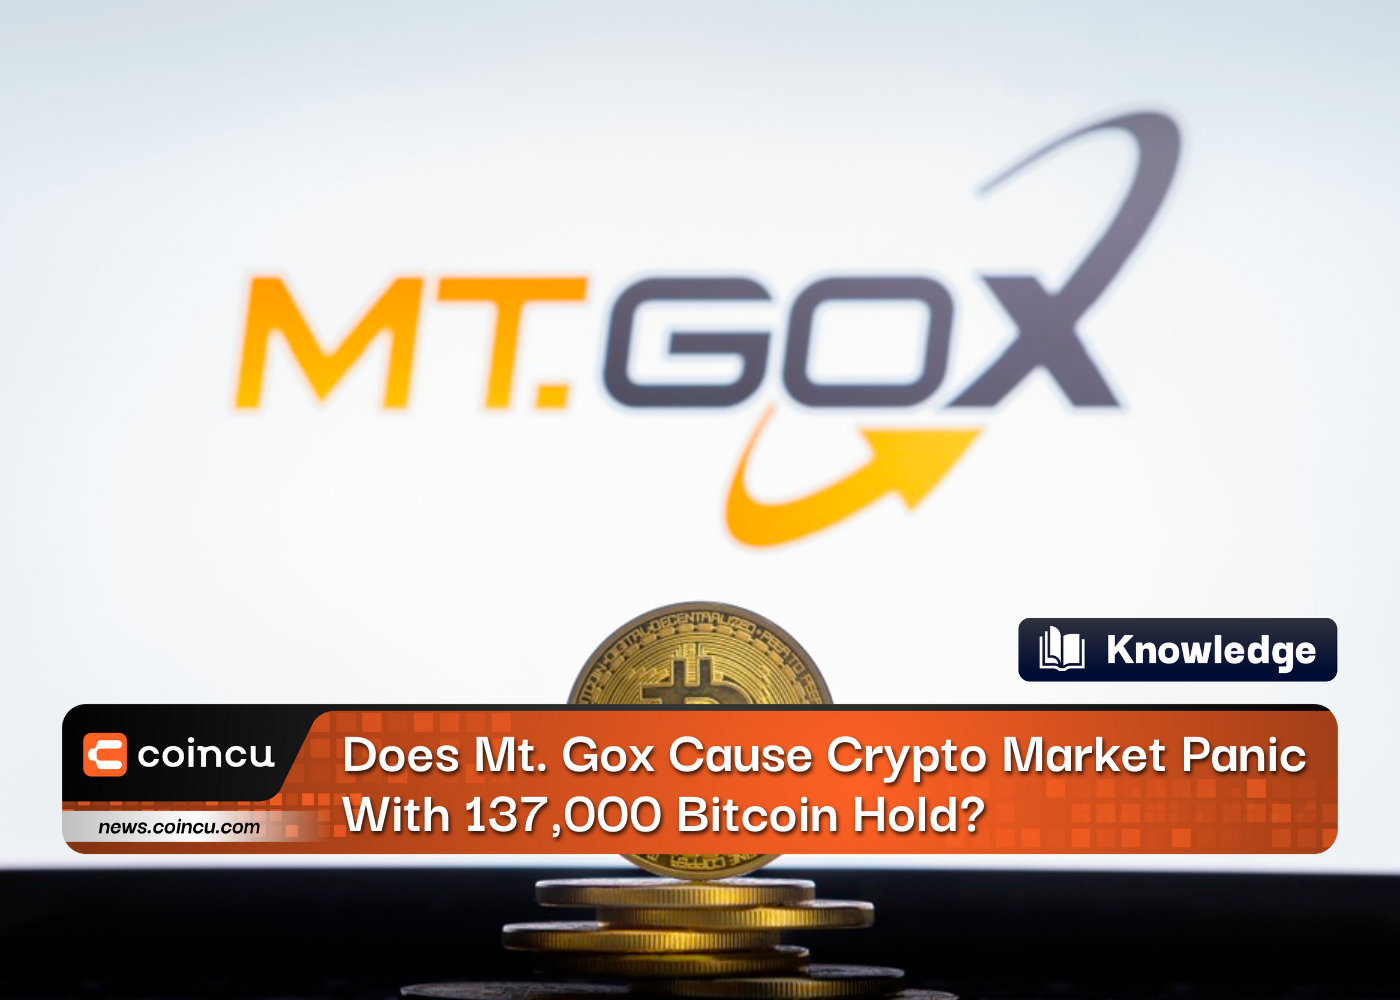 Does Mt. Gox Cause Crypto Market Panic With 137,000 Bitcoin Hold?